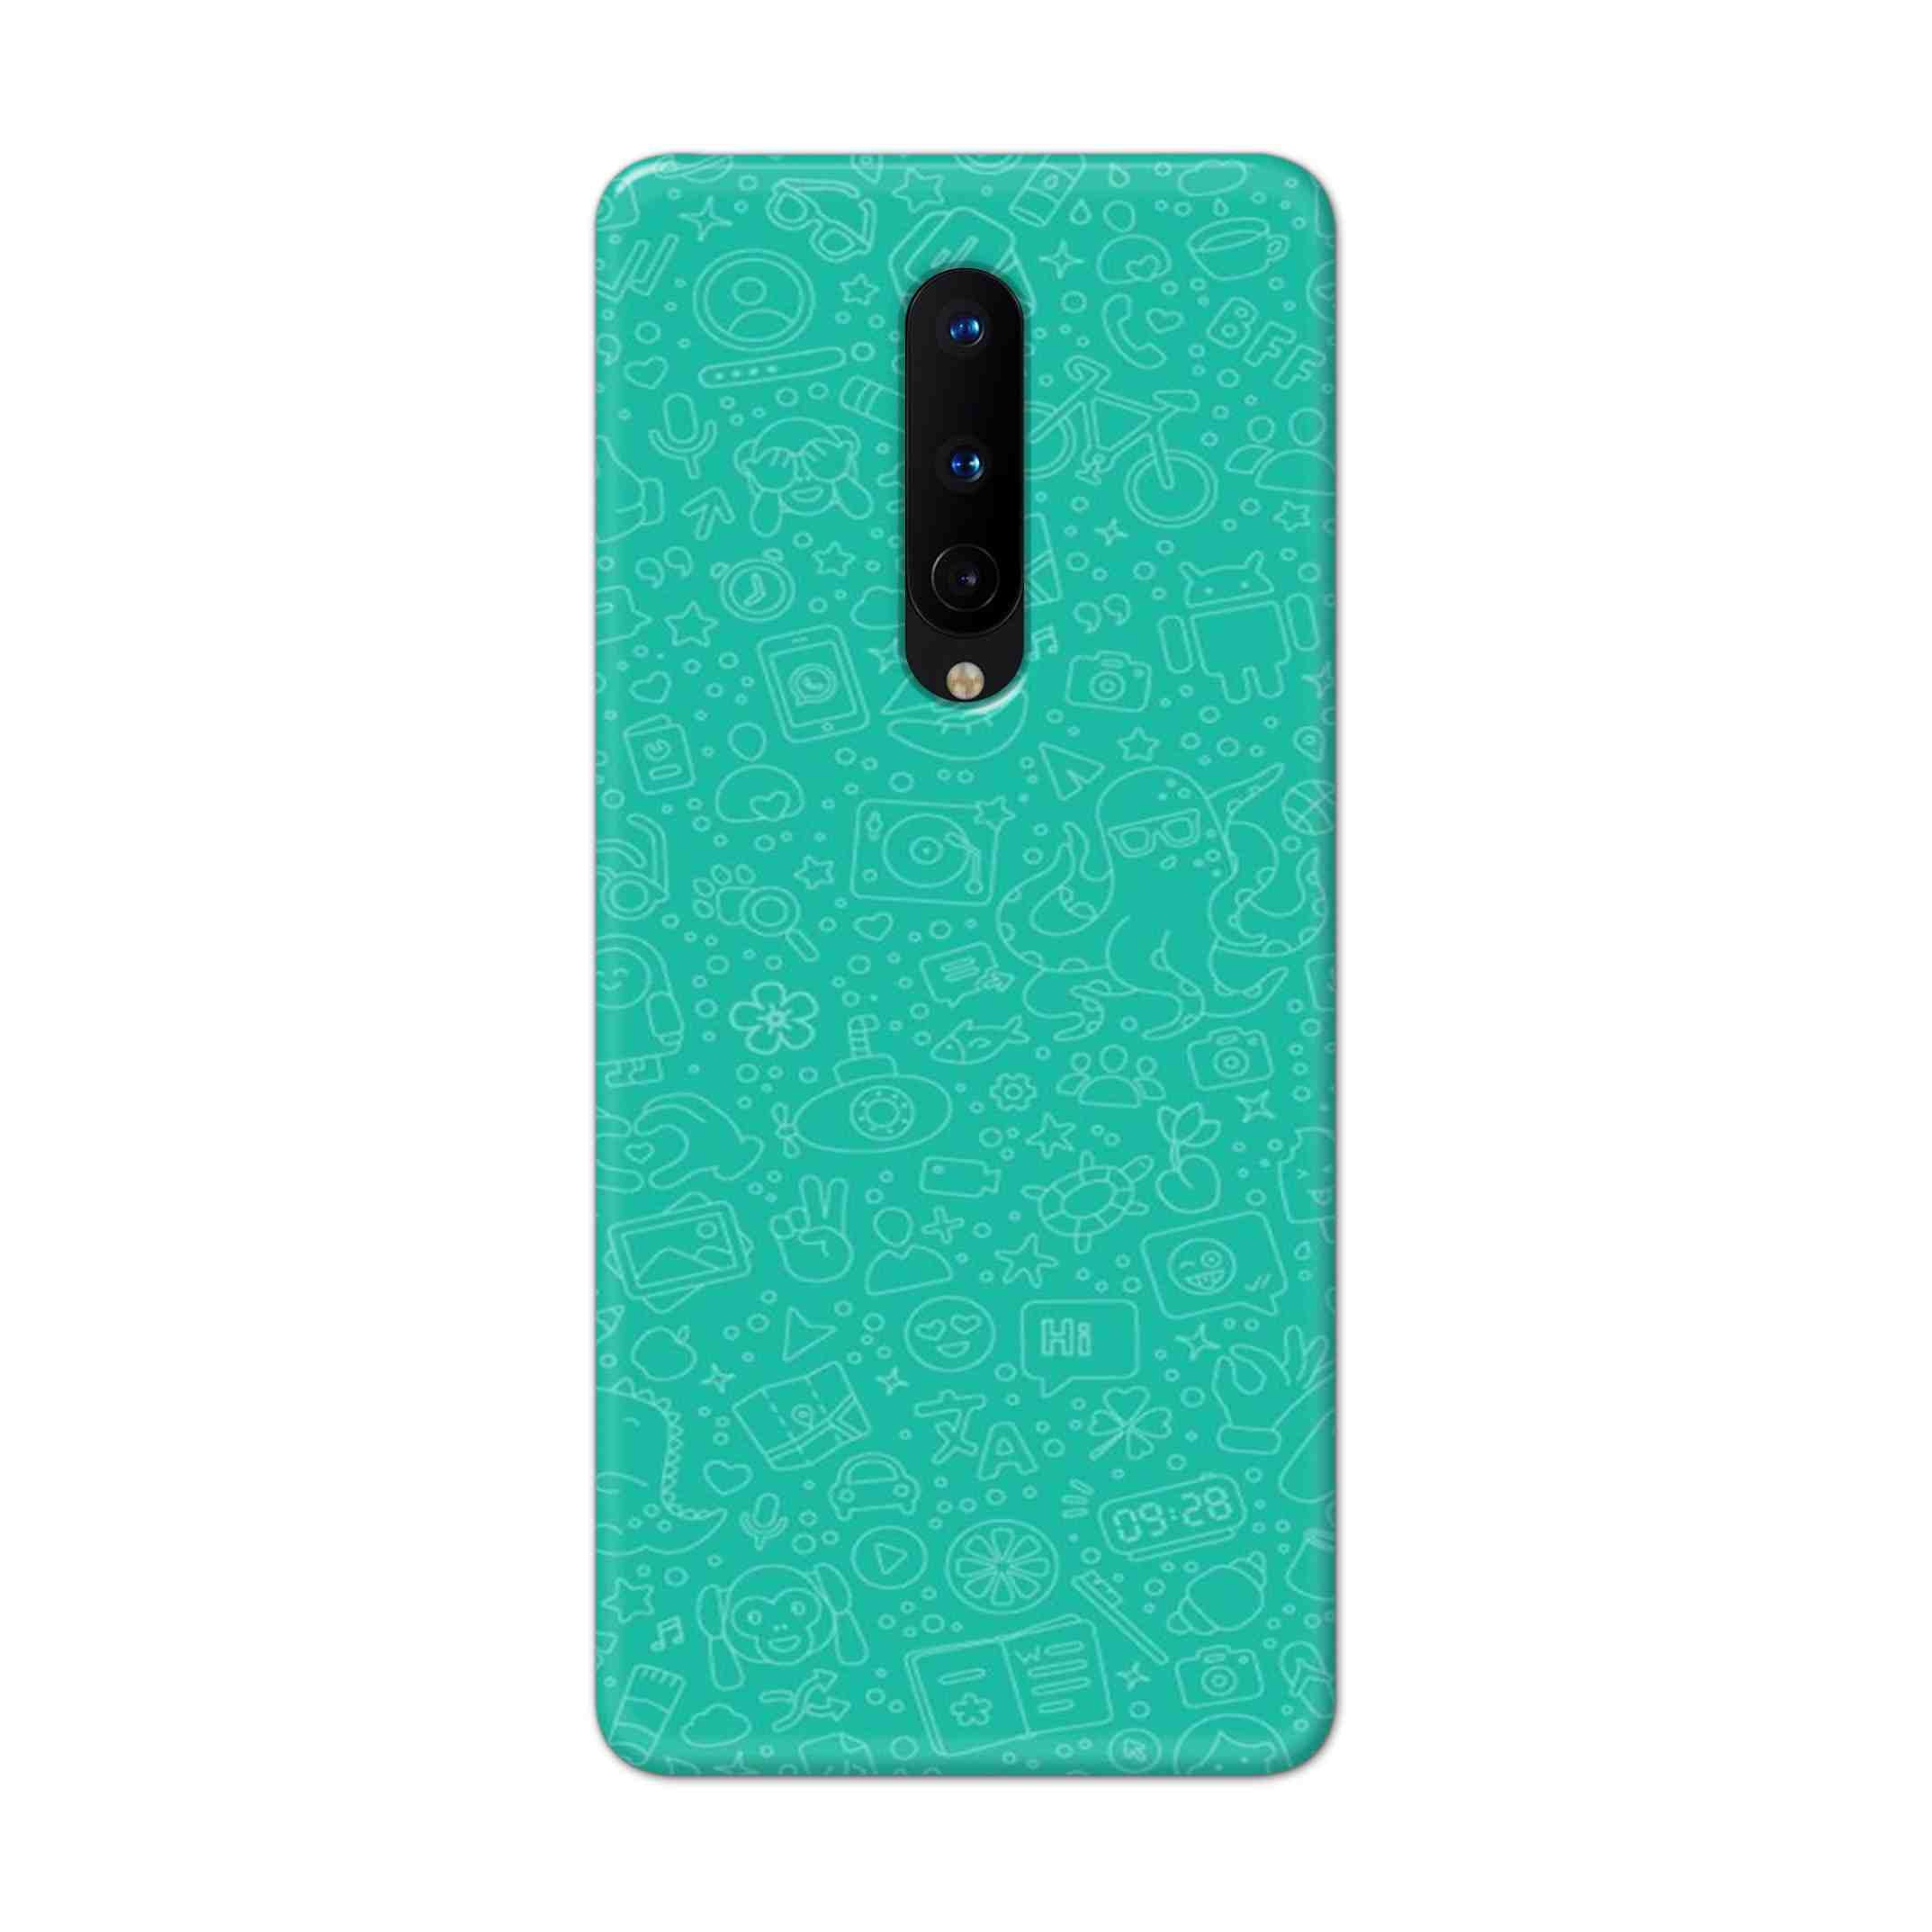 Buy Whatsapp Hard Back Mobile Phone Case Cover For OnePlus 8 Online